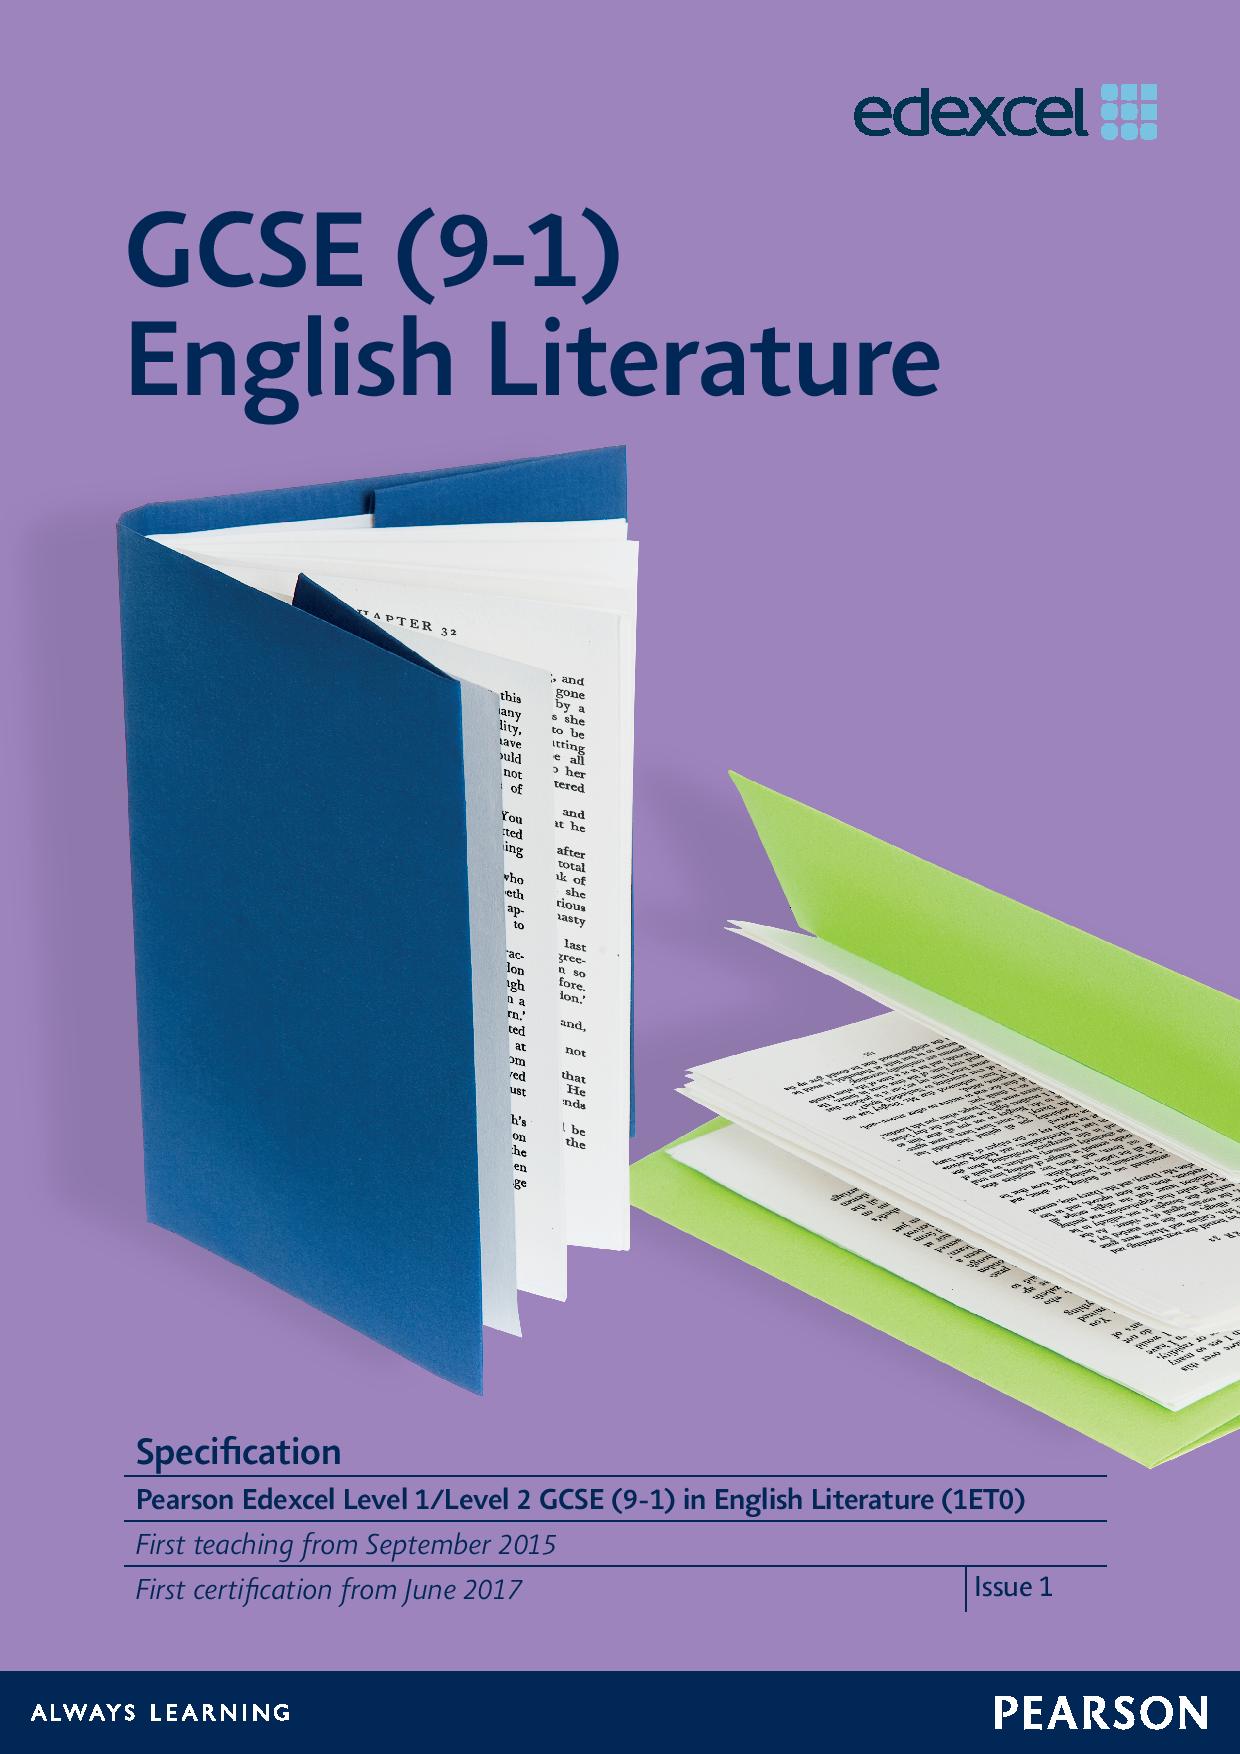 Link to GCSE (9-1) English Literature specification page